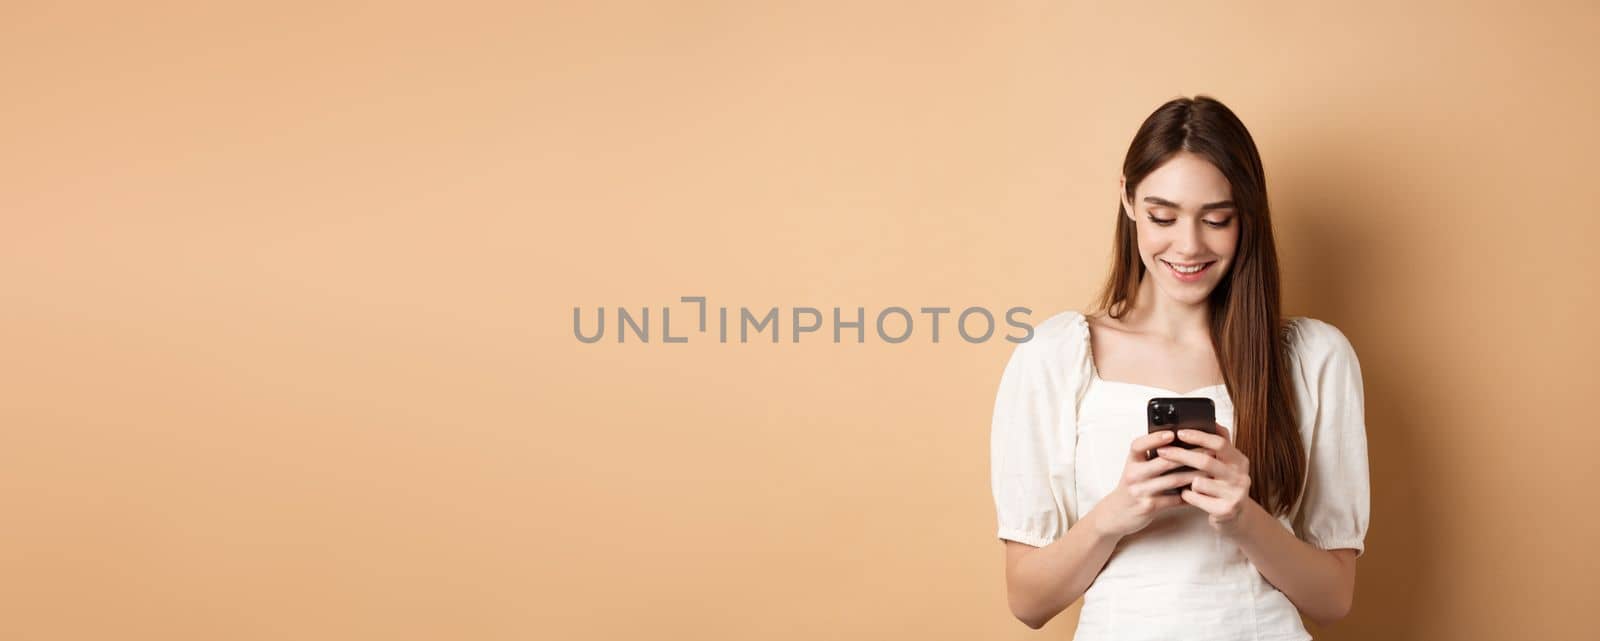 Young woman texting message on mobile phone, smiling and reading smartphone screen, standing on beige background.